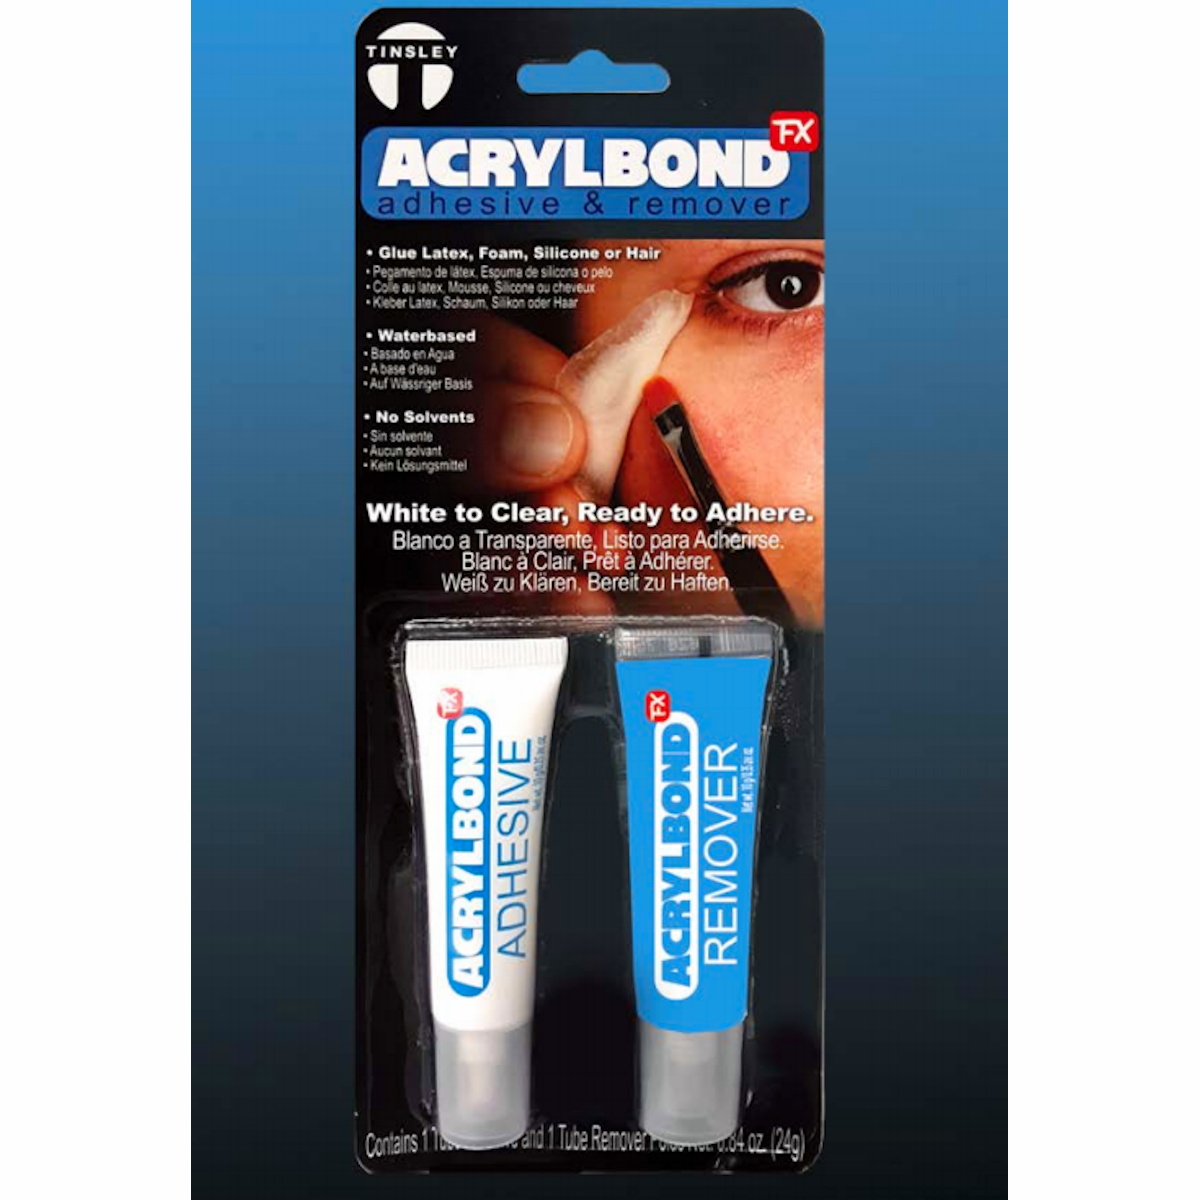 Tinsley Acrylbond Adhesive and Remover Set Make up Special FX Prostetics Adhesive